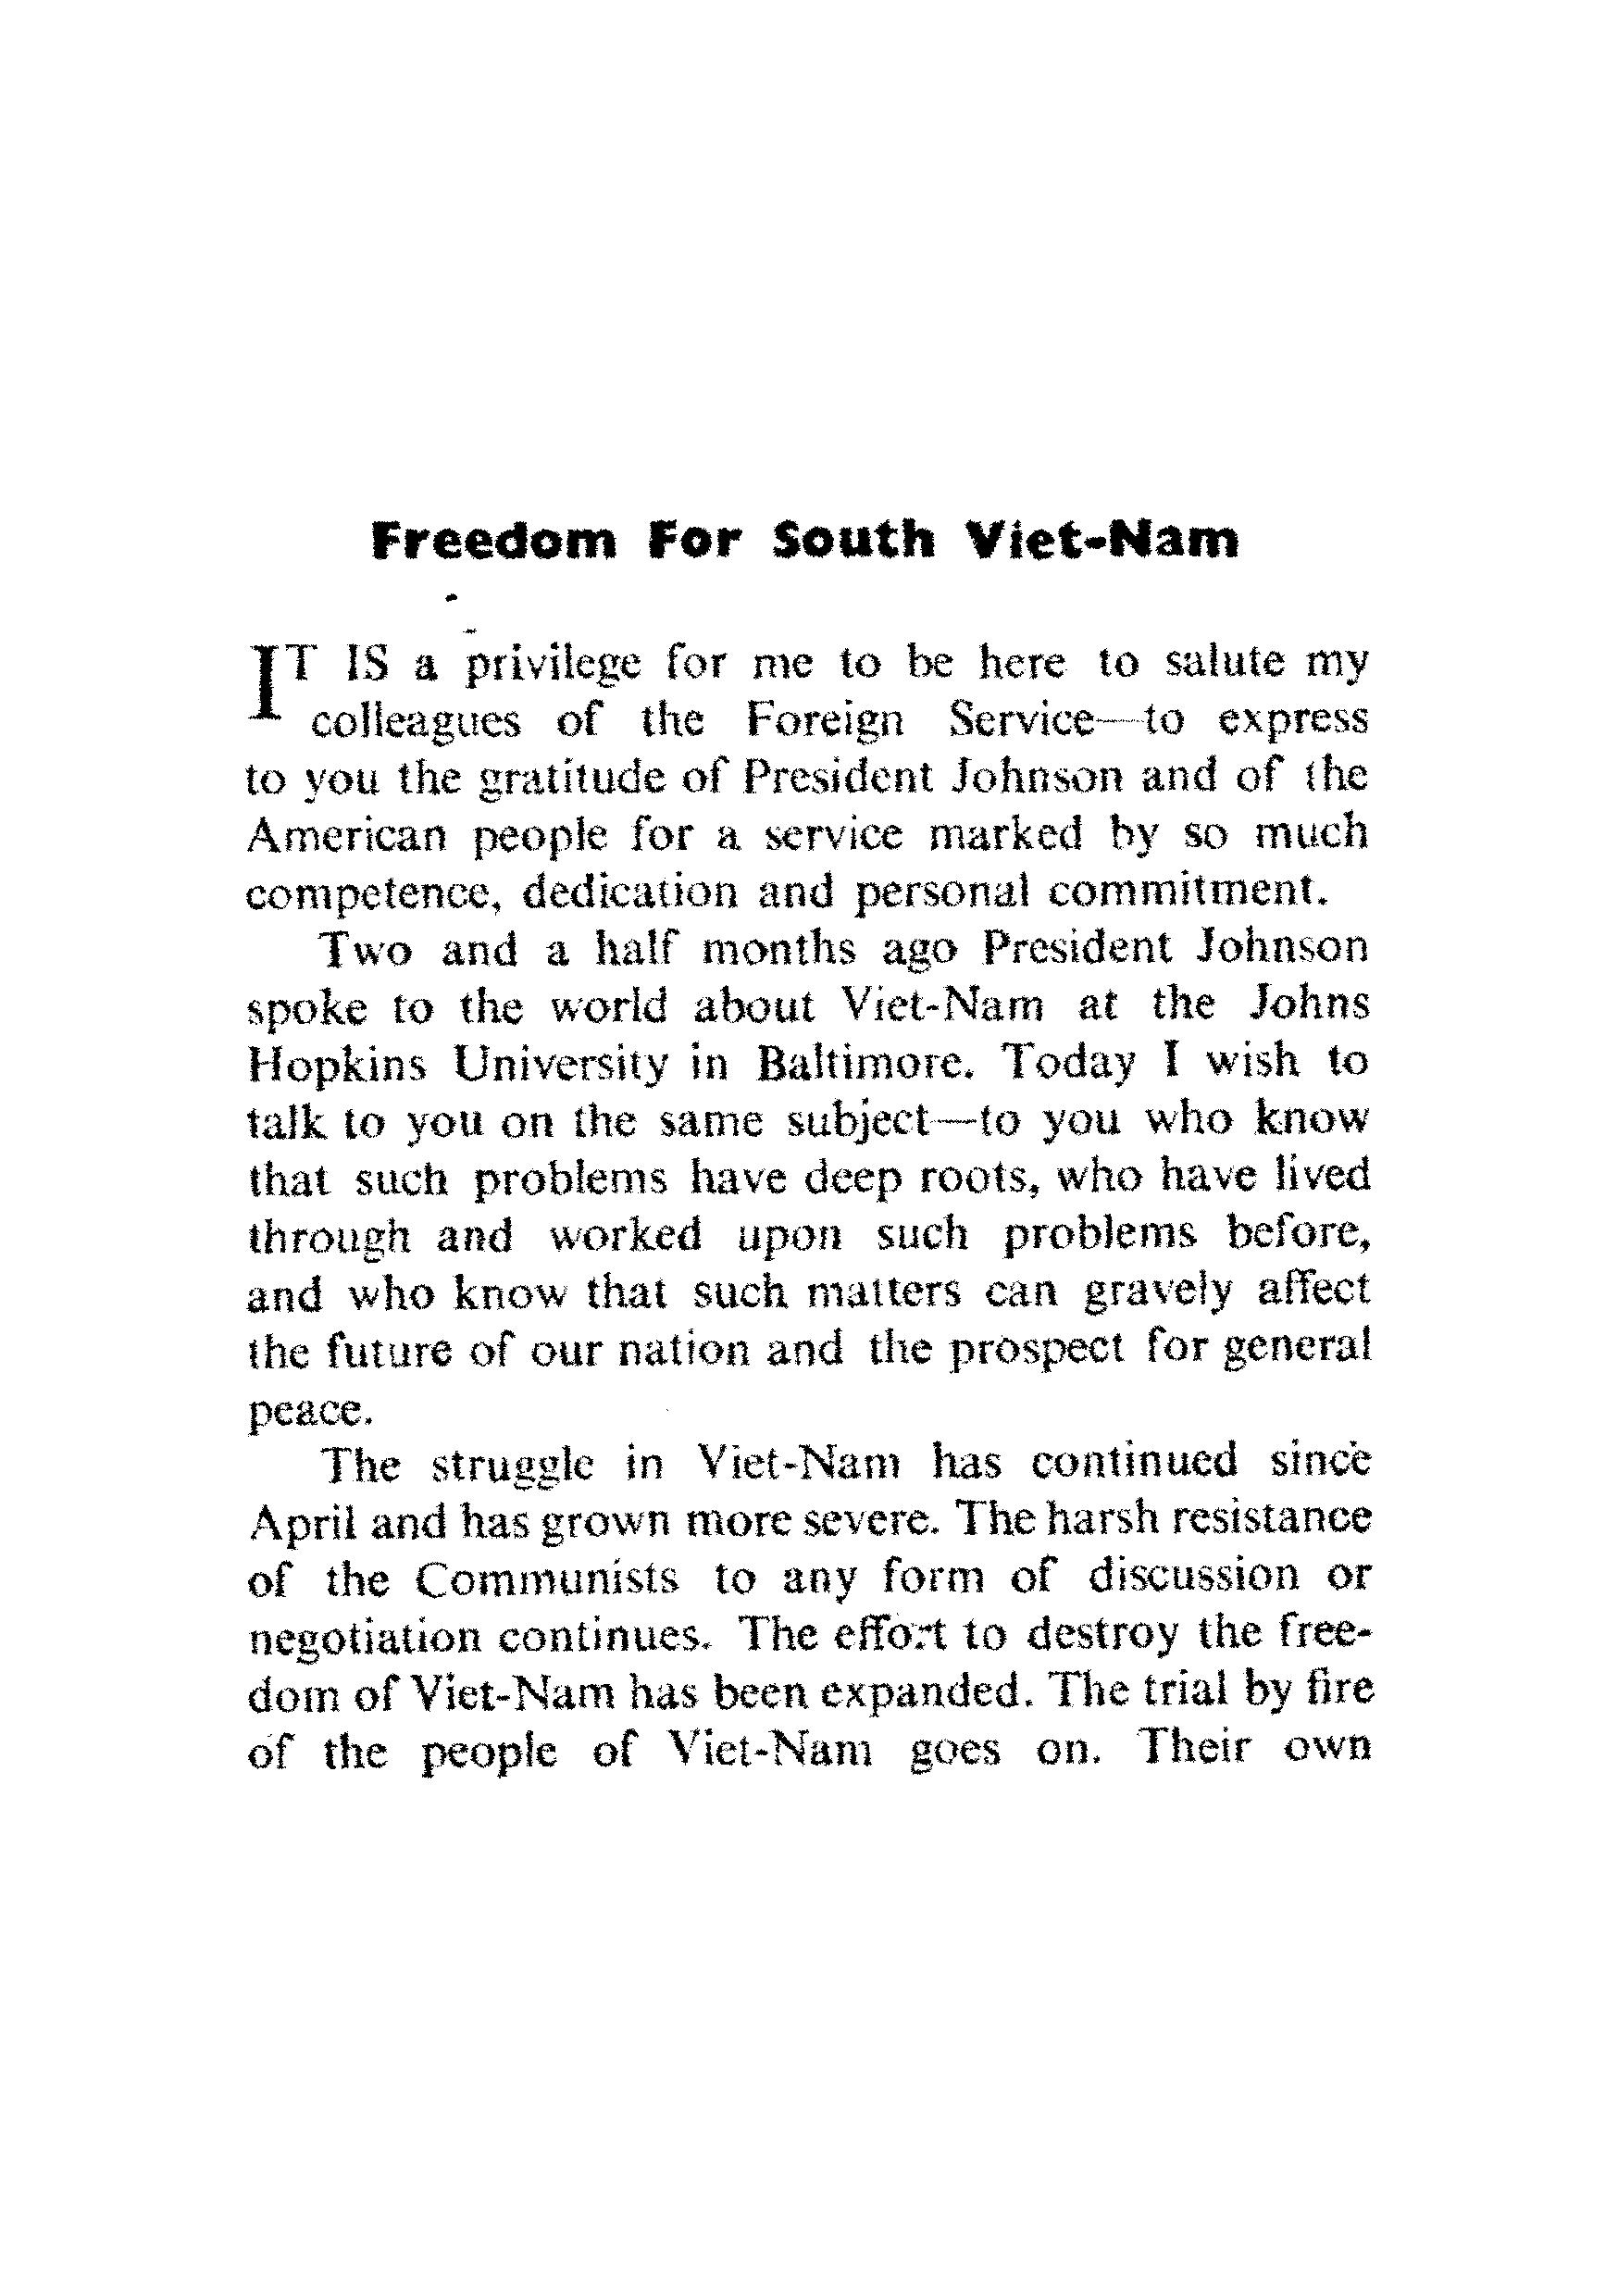 FREEDOM FOR SOUTH VIET-NAM